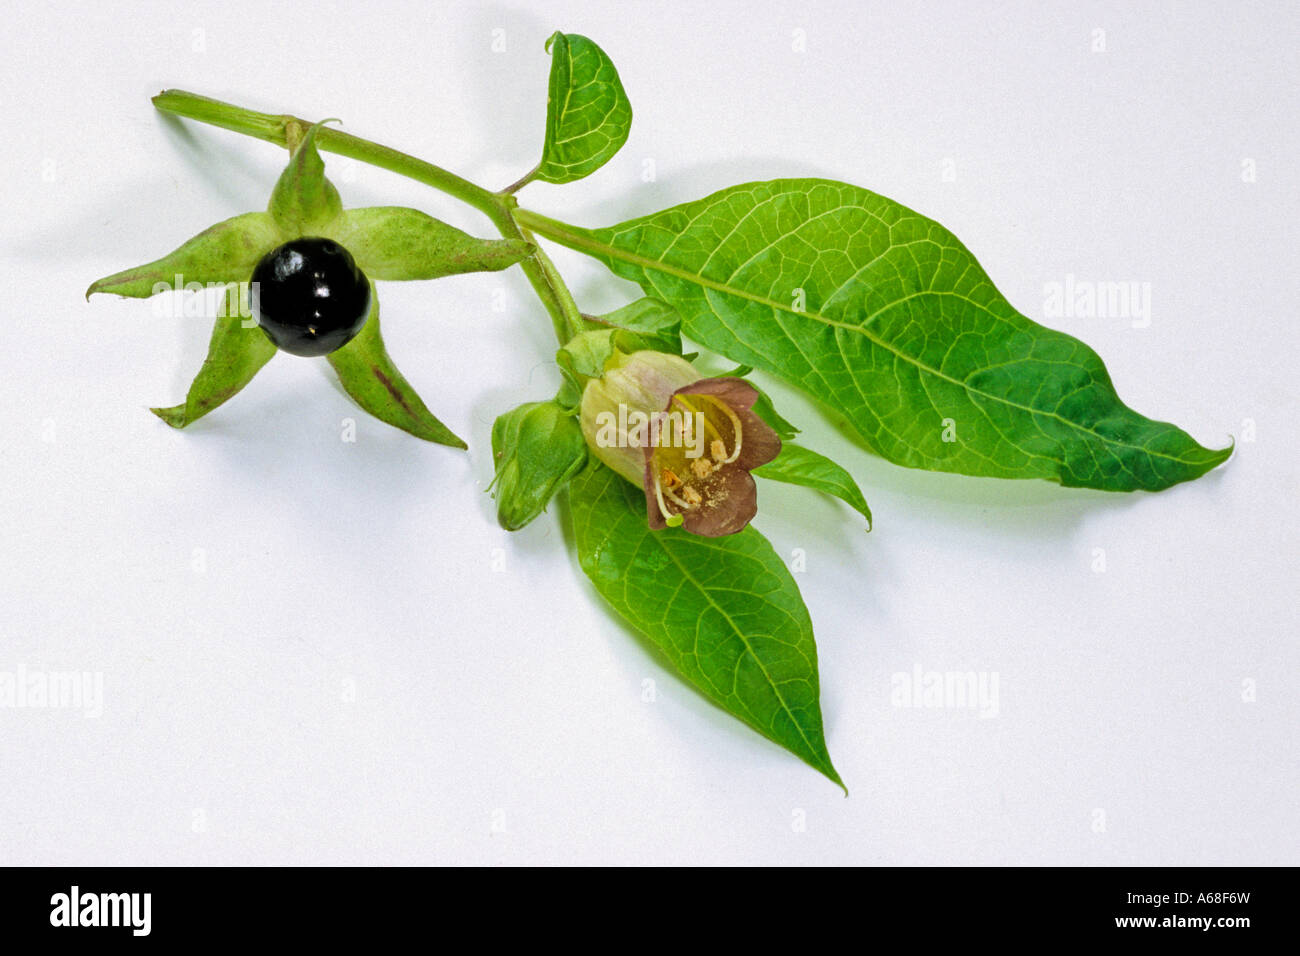 Belladonna, Deadly Nightshade Devils Cherry (Atropa belladonna), twig with leaves flower and berry, studio picture Stock Photo